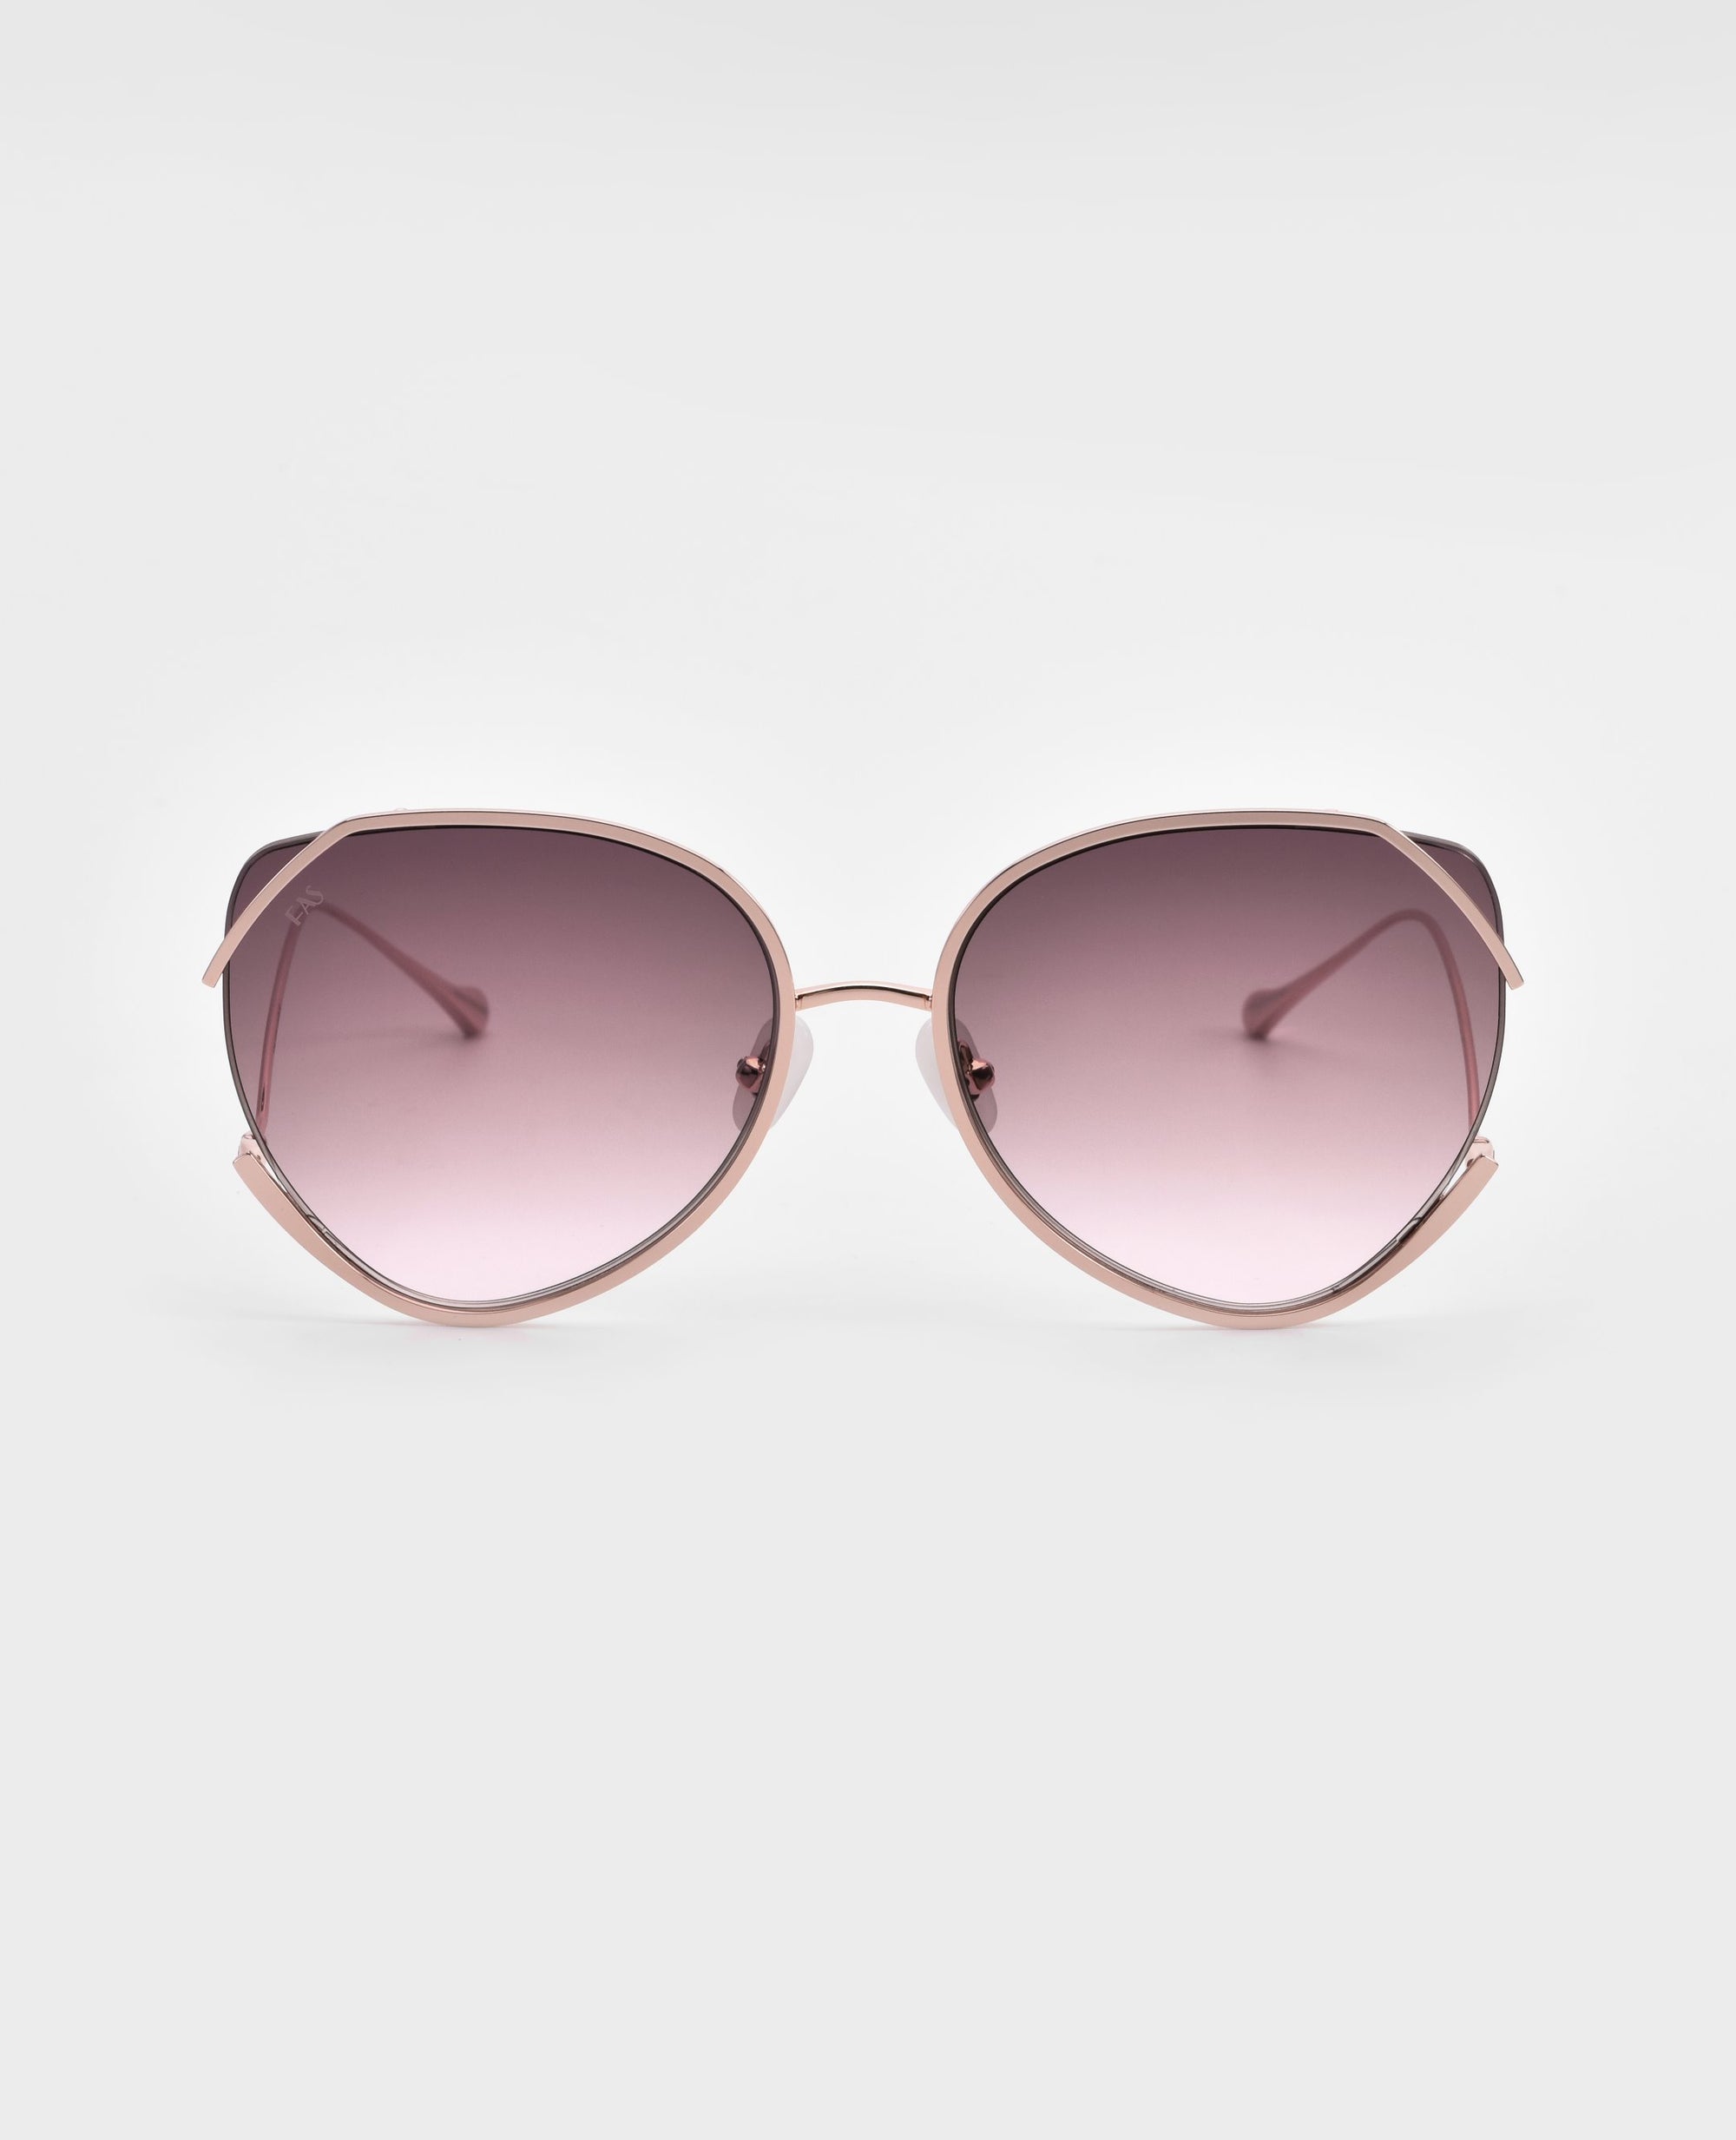 A pair of stylish Wonderland sunglasses by For Art's Sake® featuring large, round lenses with a gradient pink tint. The frame is gold-plated stainless steel with a light pink color, and the design includes emphasized curves on the edges of the lenses. Jadestone nosepads add comfort, while UVA & UVB protection ensures your eyes stay safe.